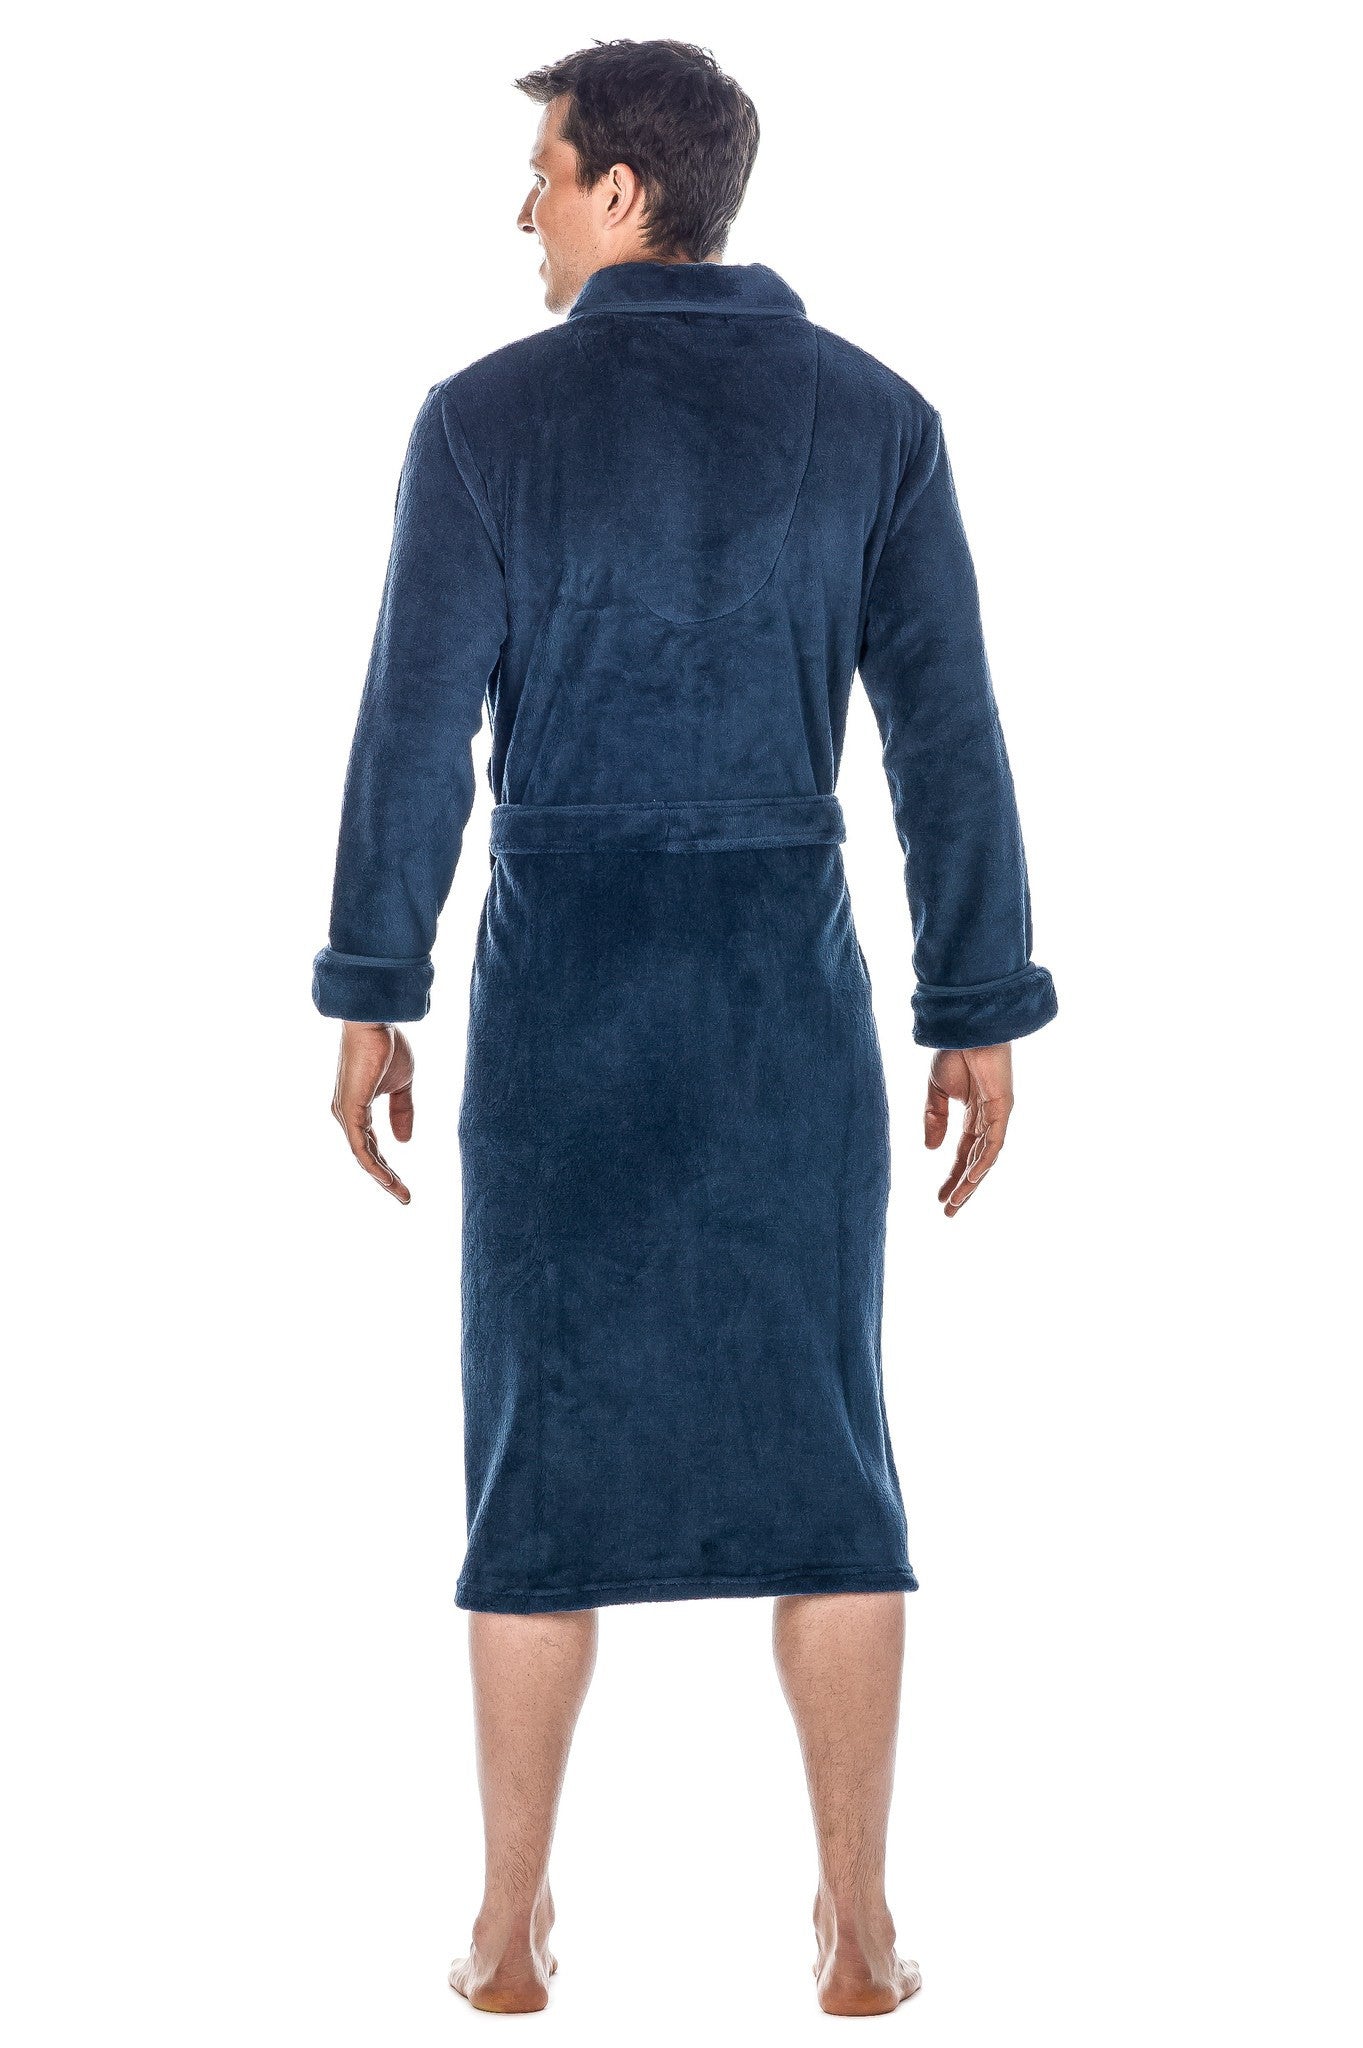 Mens Suck Water Bathrobe For Couple Sexy Night Dressing Sleep Gown For  Women And Men Kimono Robe For Lounge Lovers From Leonardria, $17.48 |  DHgate.Com